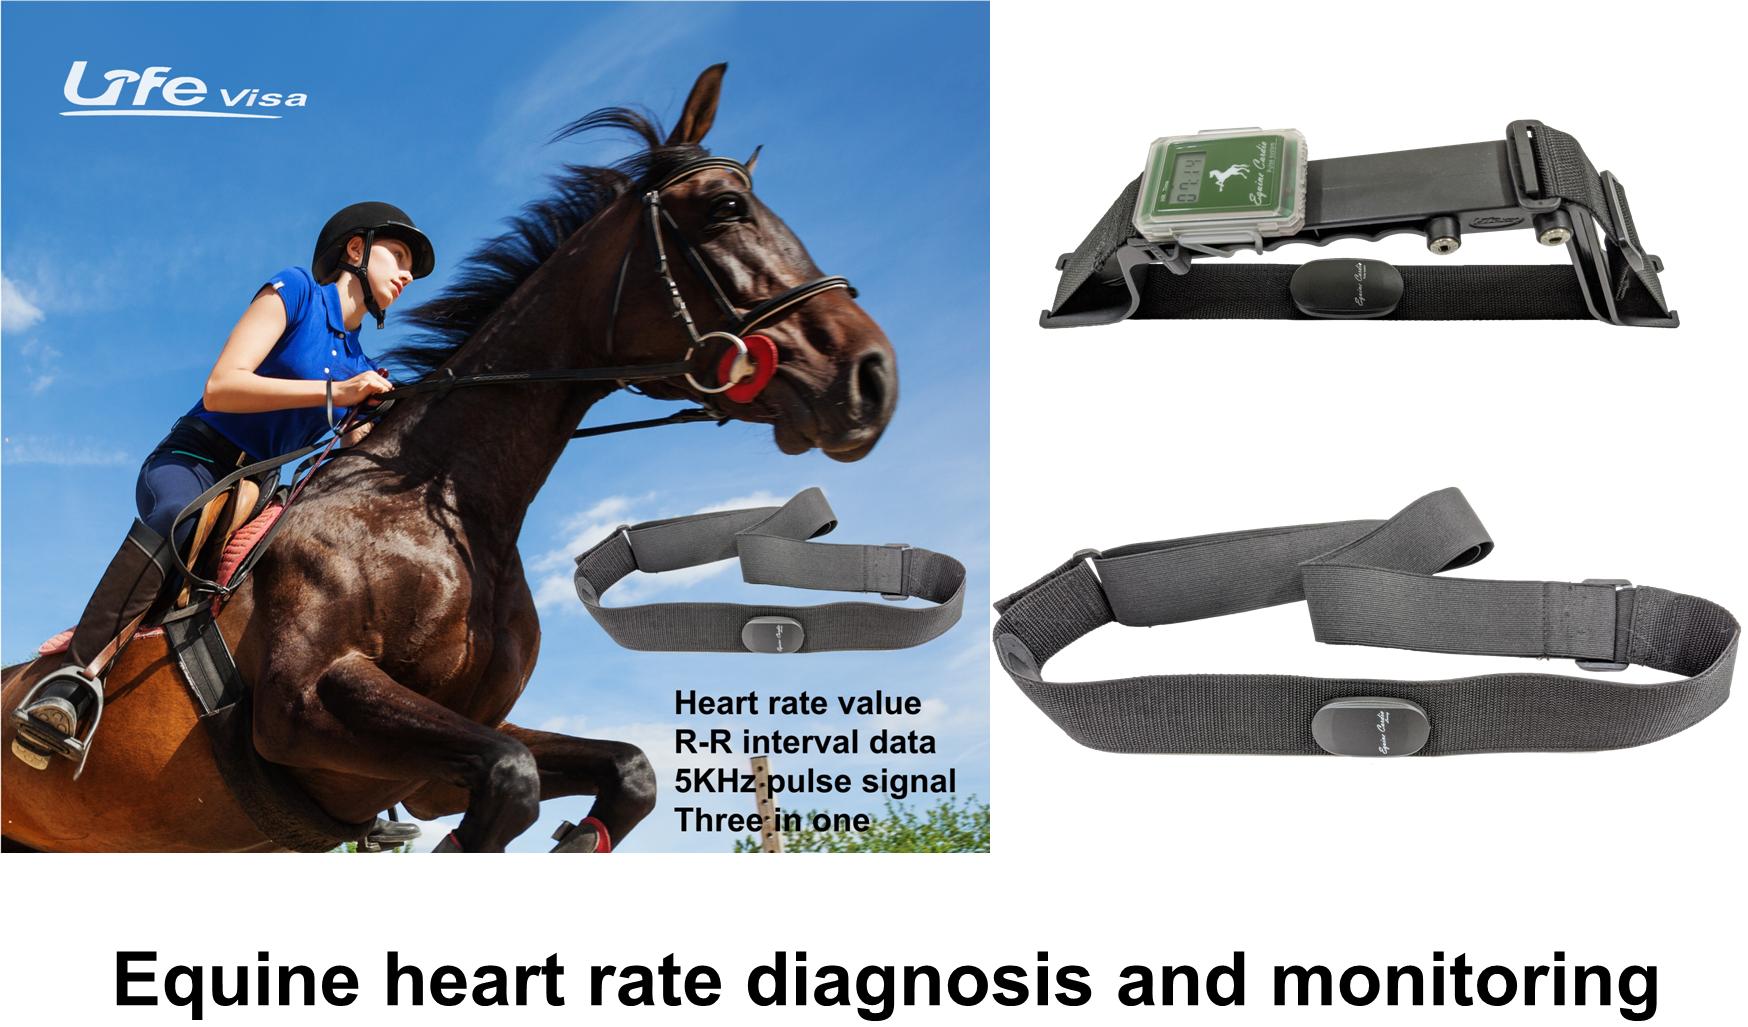 Equine heart rate healthcheck and monitor